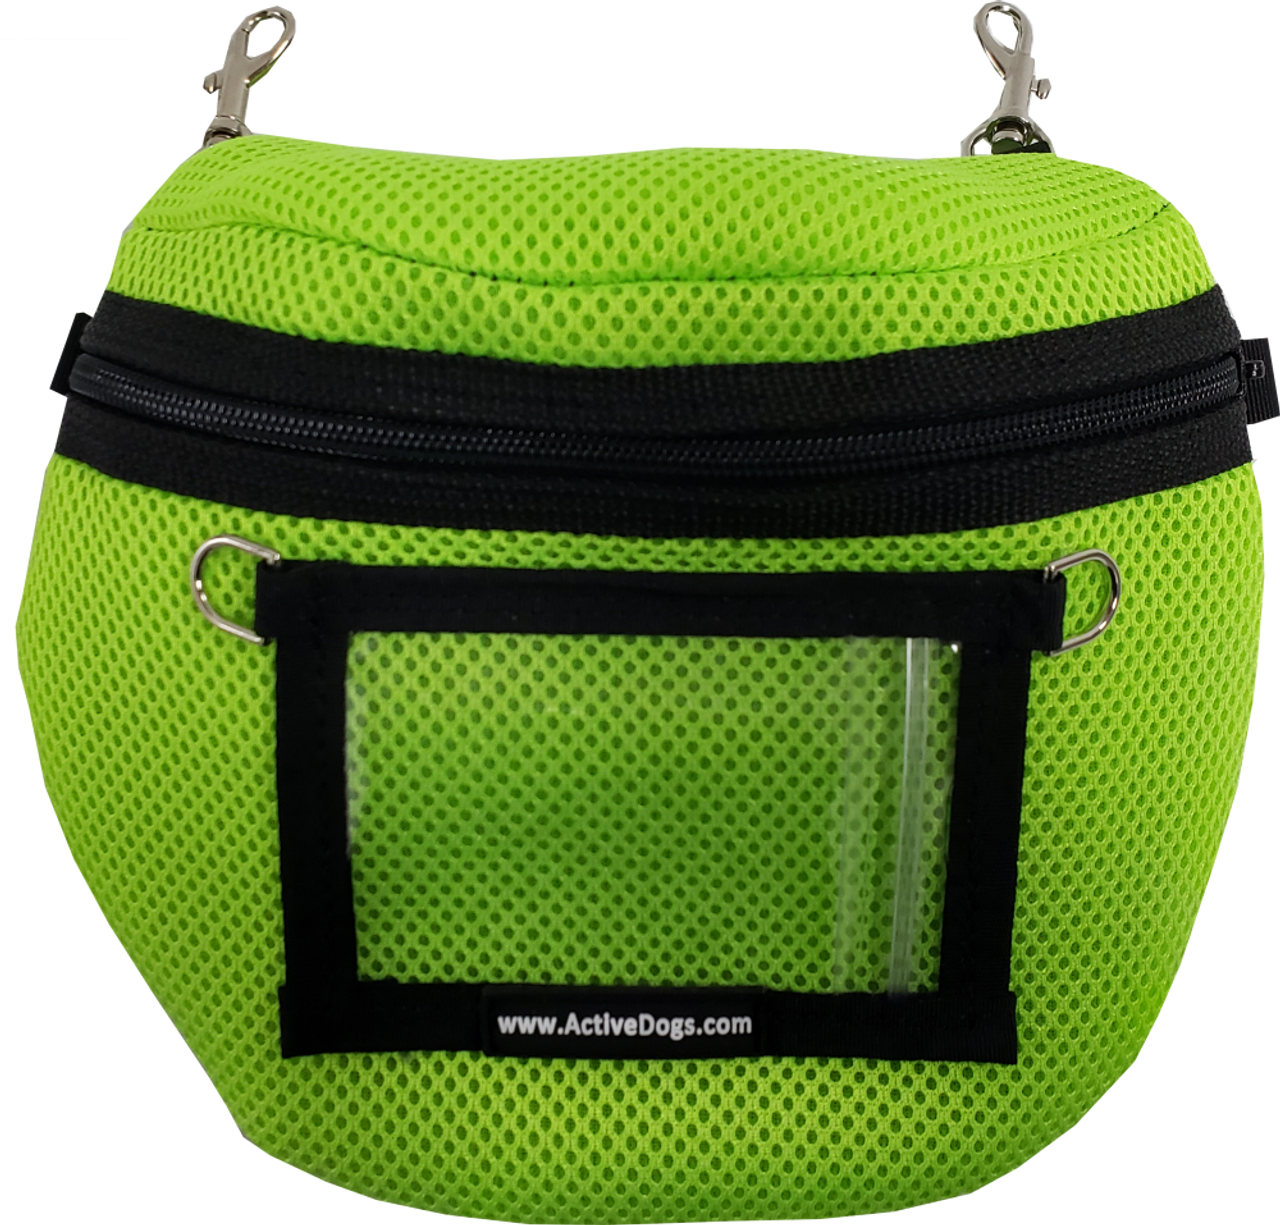 Spacer Mesh Clip-On Back Bag w/ Clear Window